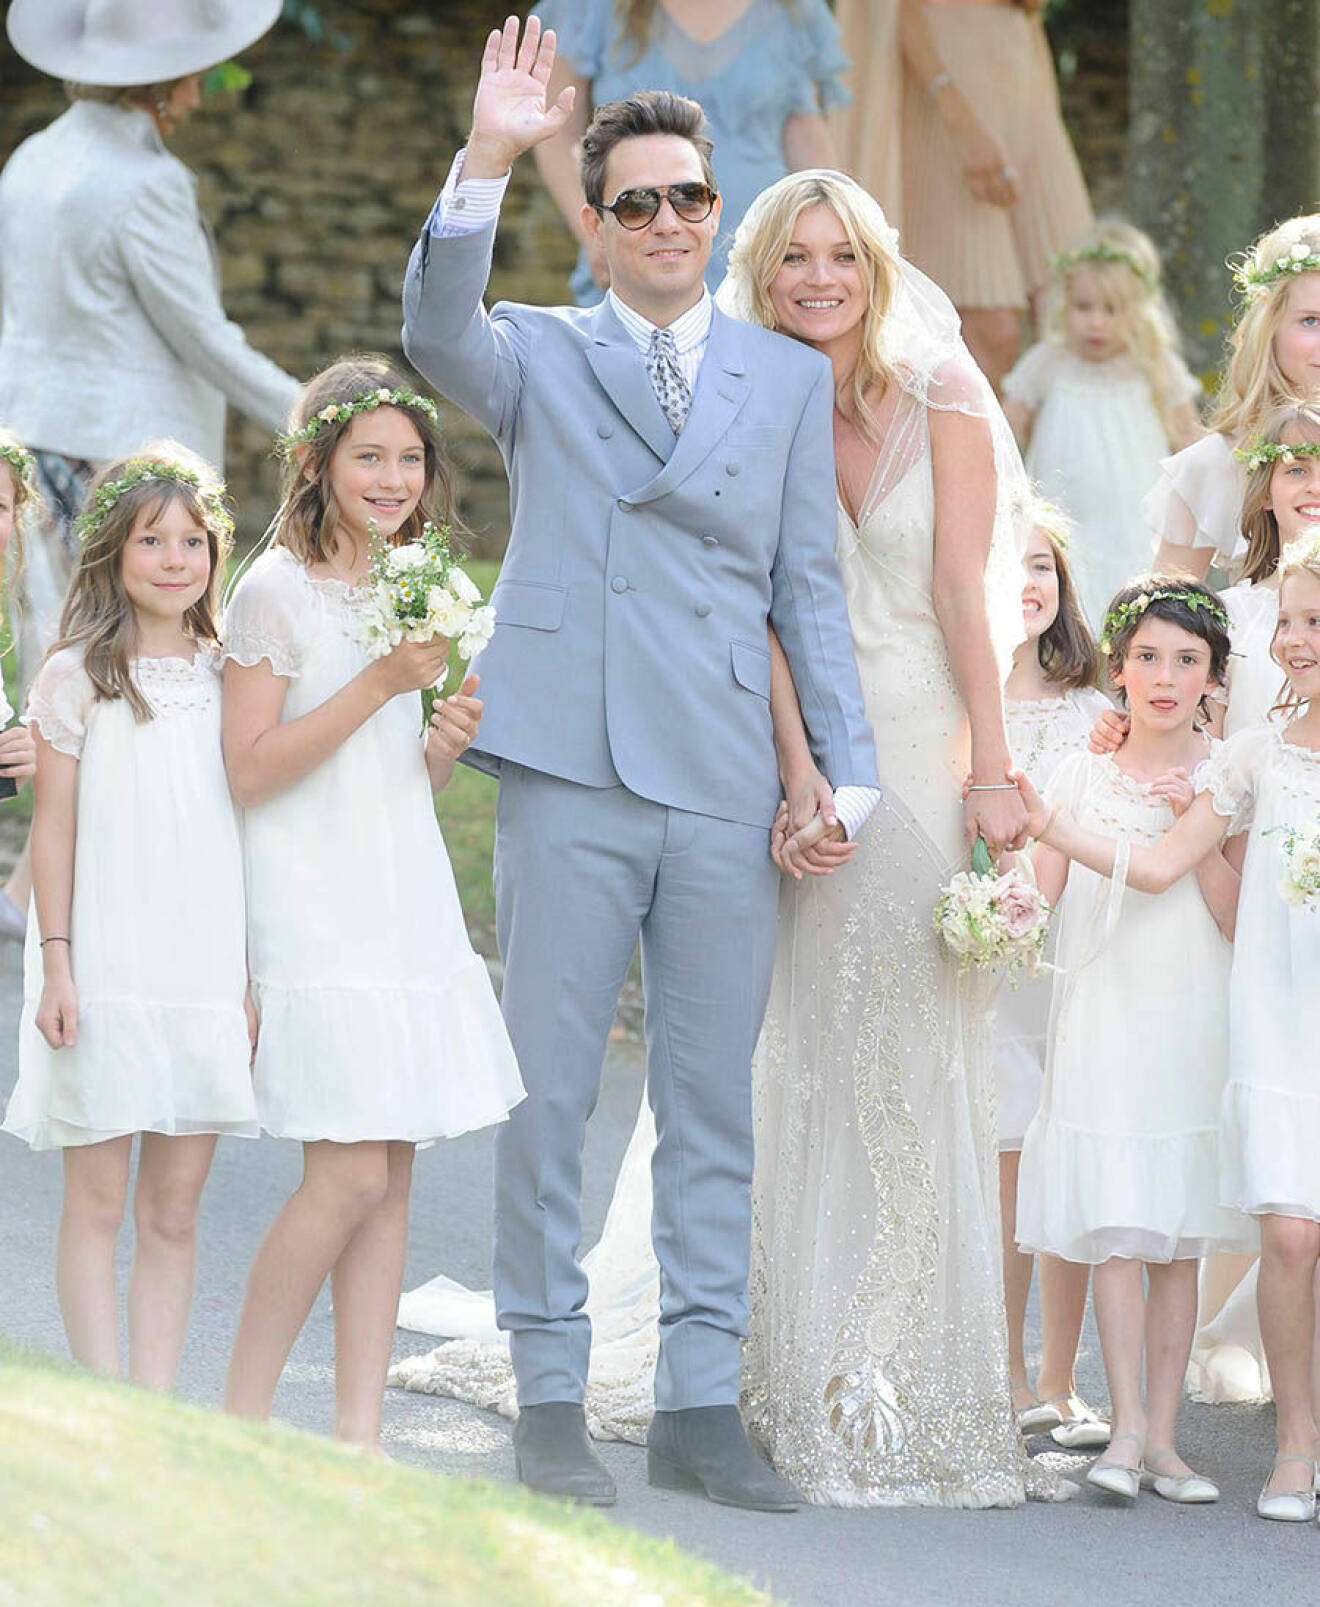 01.JULY.2011. SOUTHROP  KATE MOSS WITH HER DAUGHTER LILA AND JAMIE HINCE AT THE KATE MOSS AND JAMIE HINCE WEDDING CEREMONY HELD AT SOUTHROP VILLAGE IN THE COTSWOLDS.